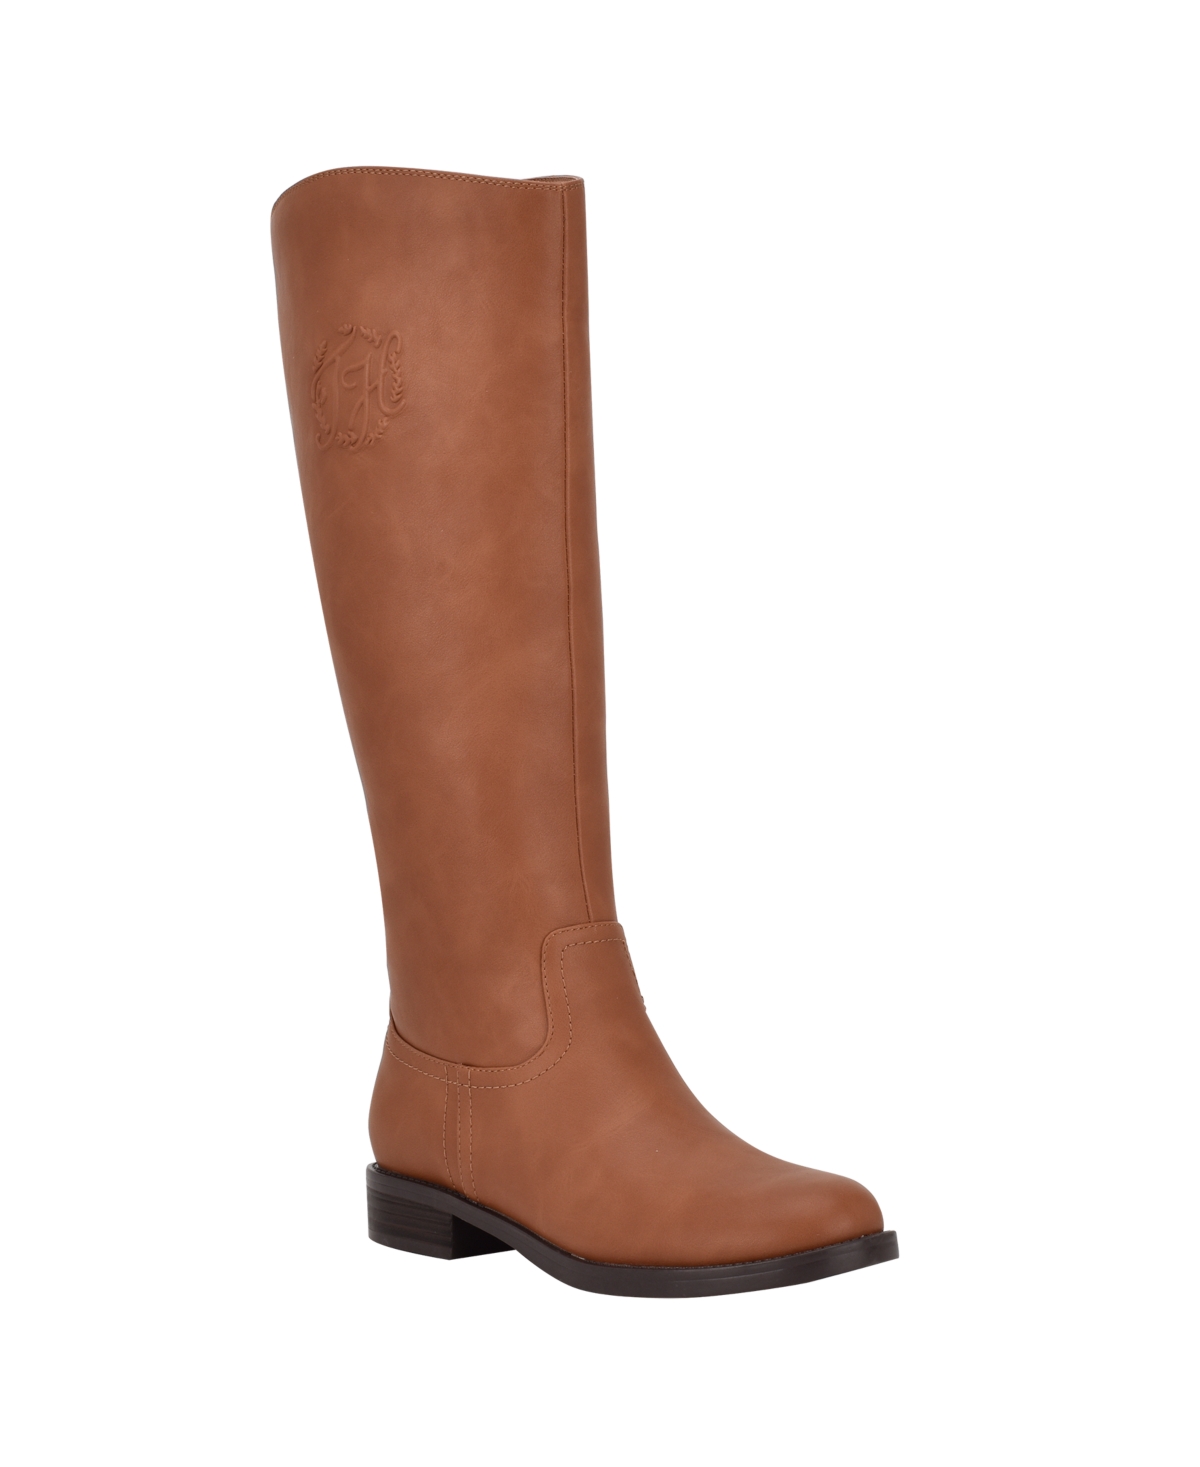 UPC 195972921290 product image for Tommy Hilfiger Women's Rydings Riding Boots Women's Shoes | upcitemdb.com